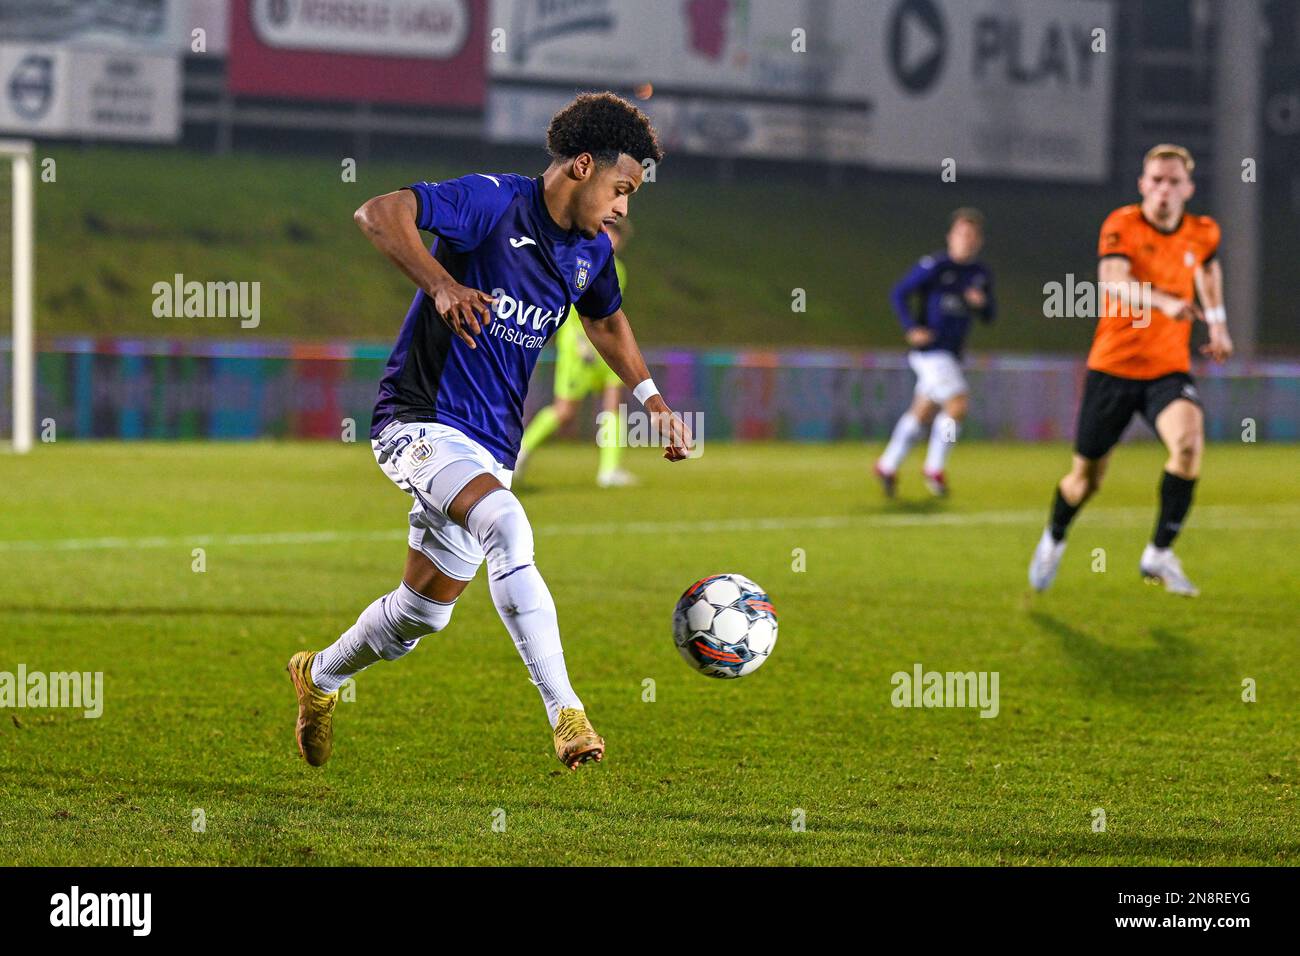 Ilay Camara (57) of RSC Anderlecht pictured during a soccer game between  KMSK Deinze and RSC Anderlecht Futures youth team during the 22 nd matchday  in the Challenger Pro League for the